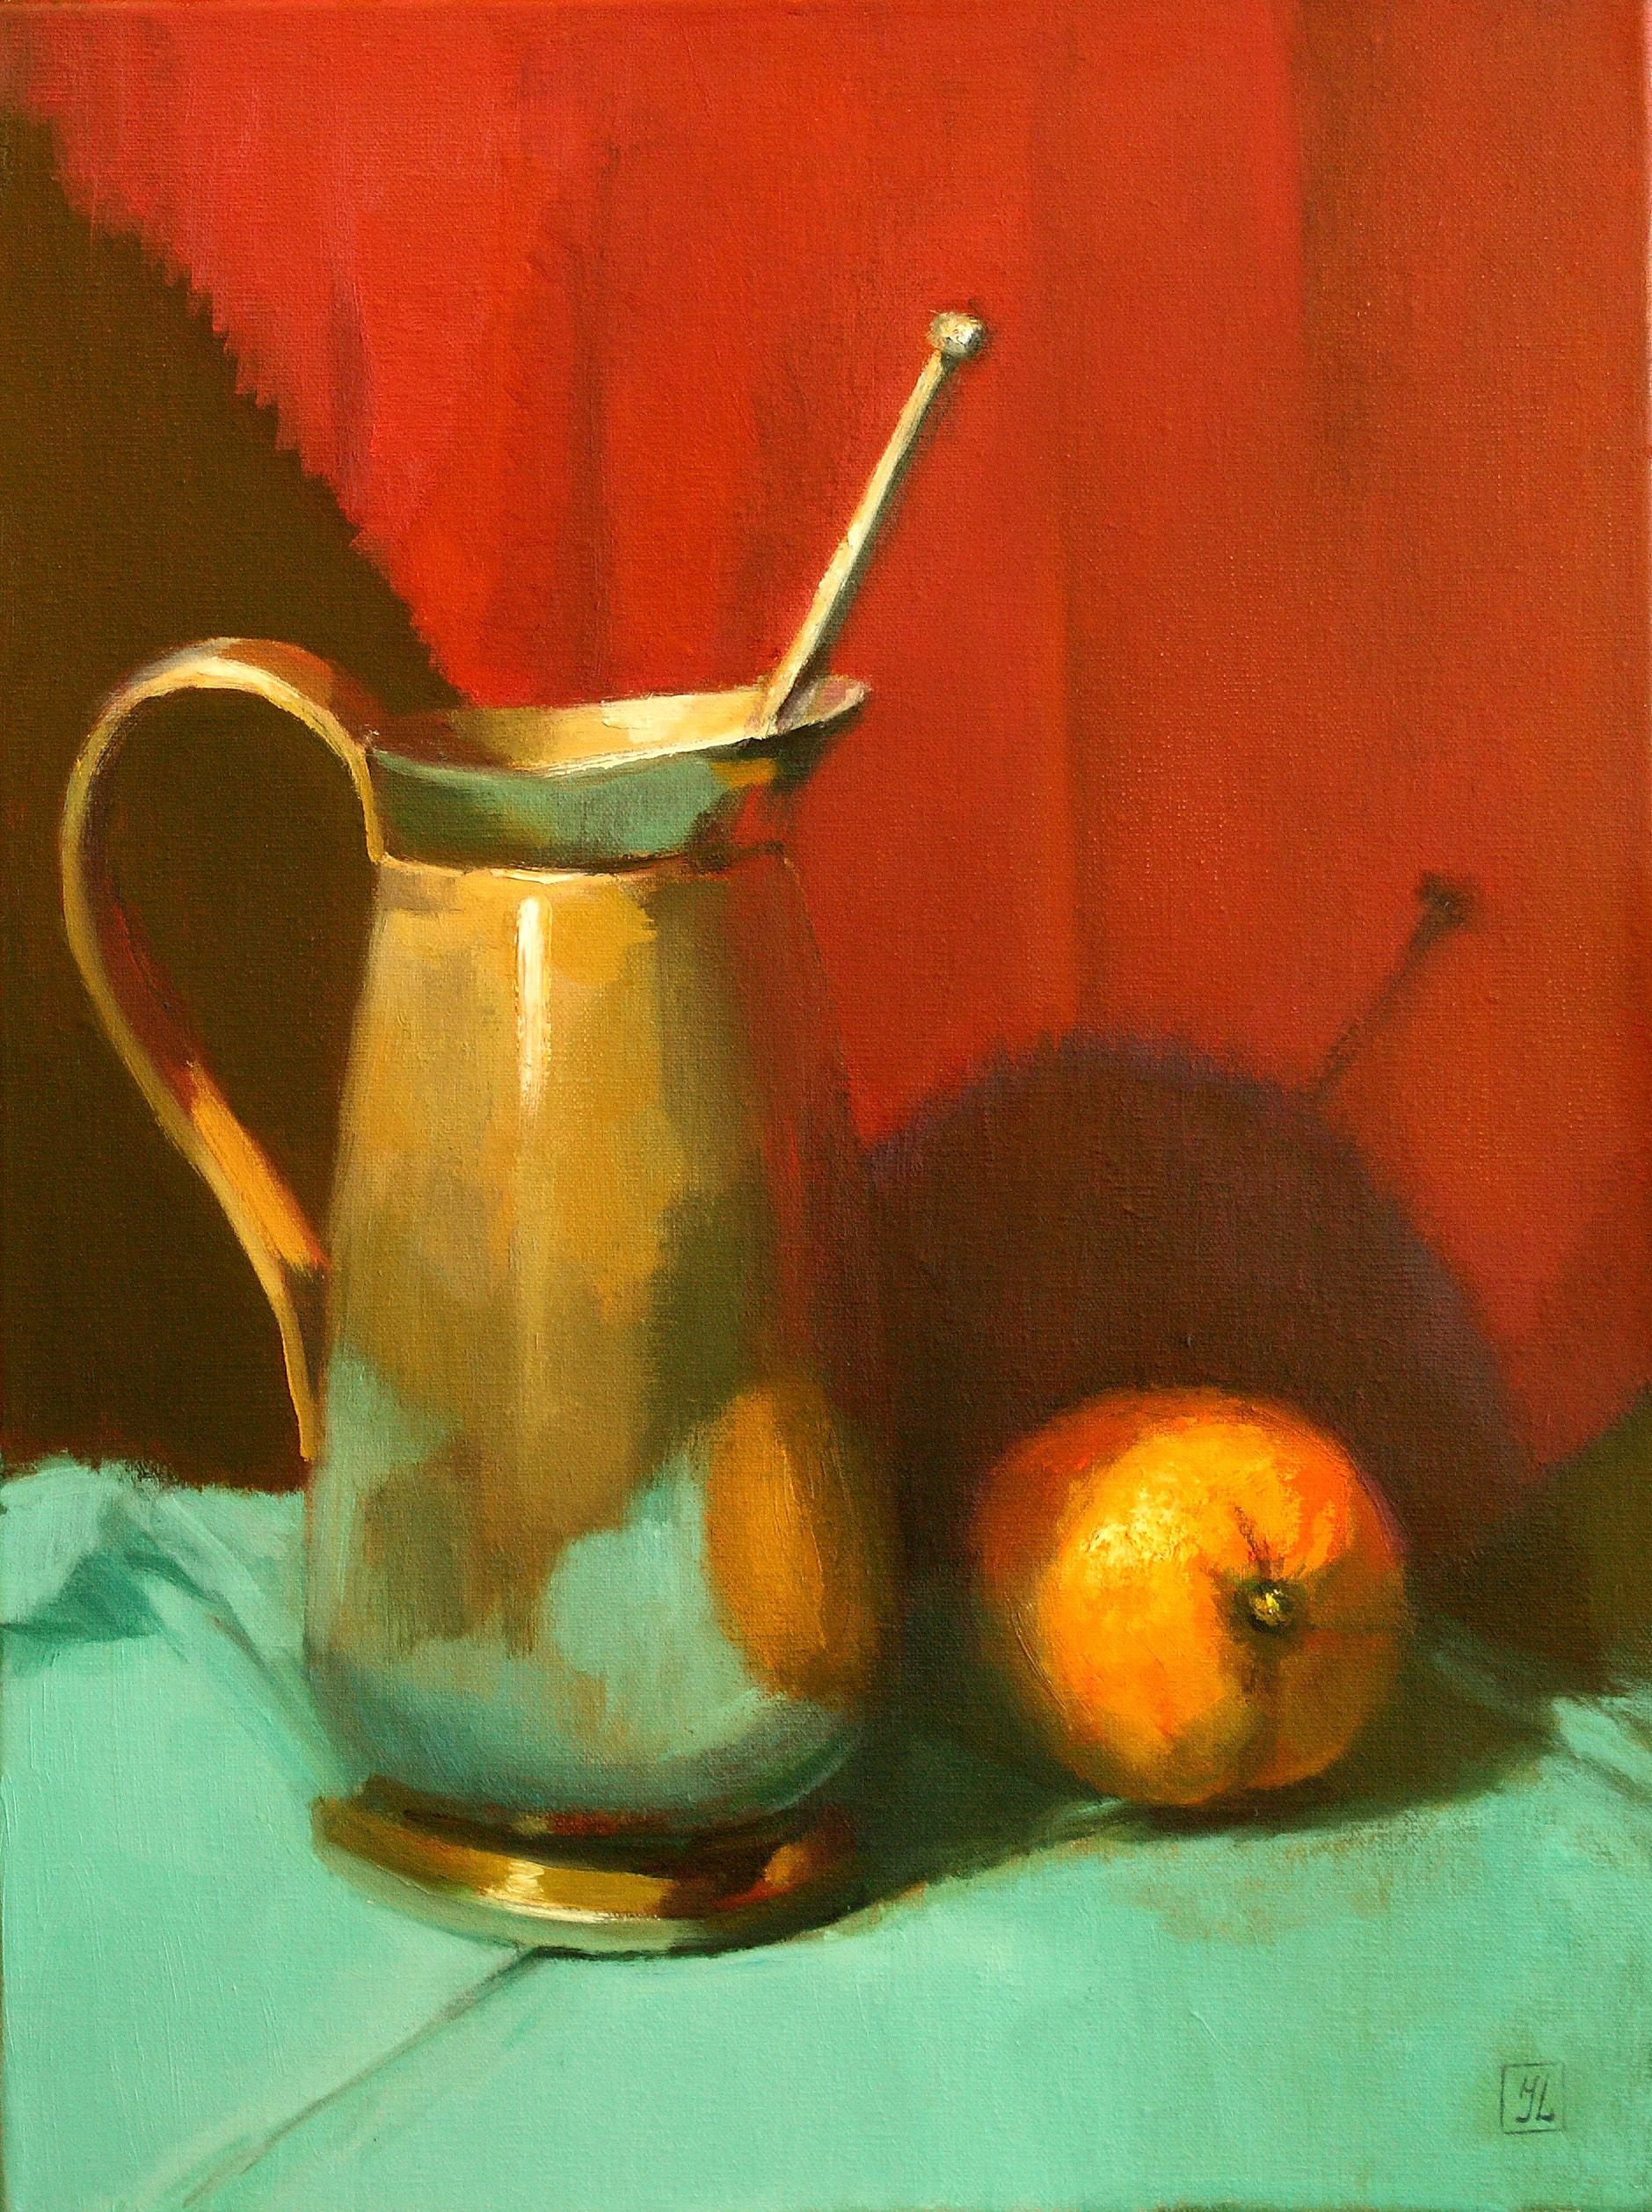 A silver pitcher and orange are shown on a turquoise tablecloth with a cherry red cloth in the background. This painting is all about relationships. The subjects are both close and contradictory. The polished smooth pitcher is tall and slender,